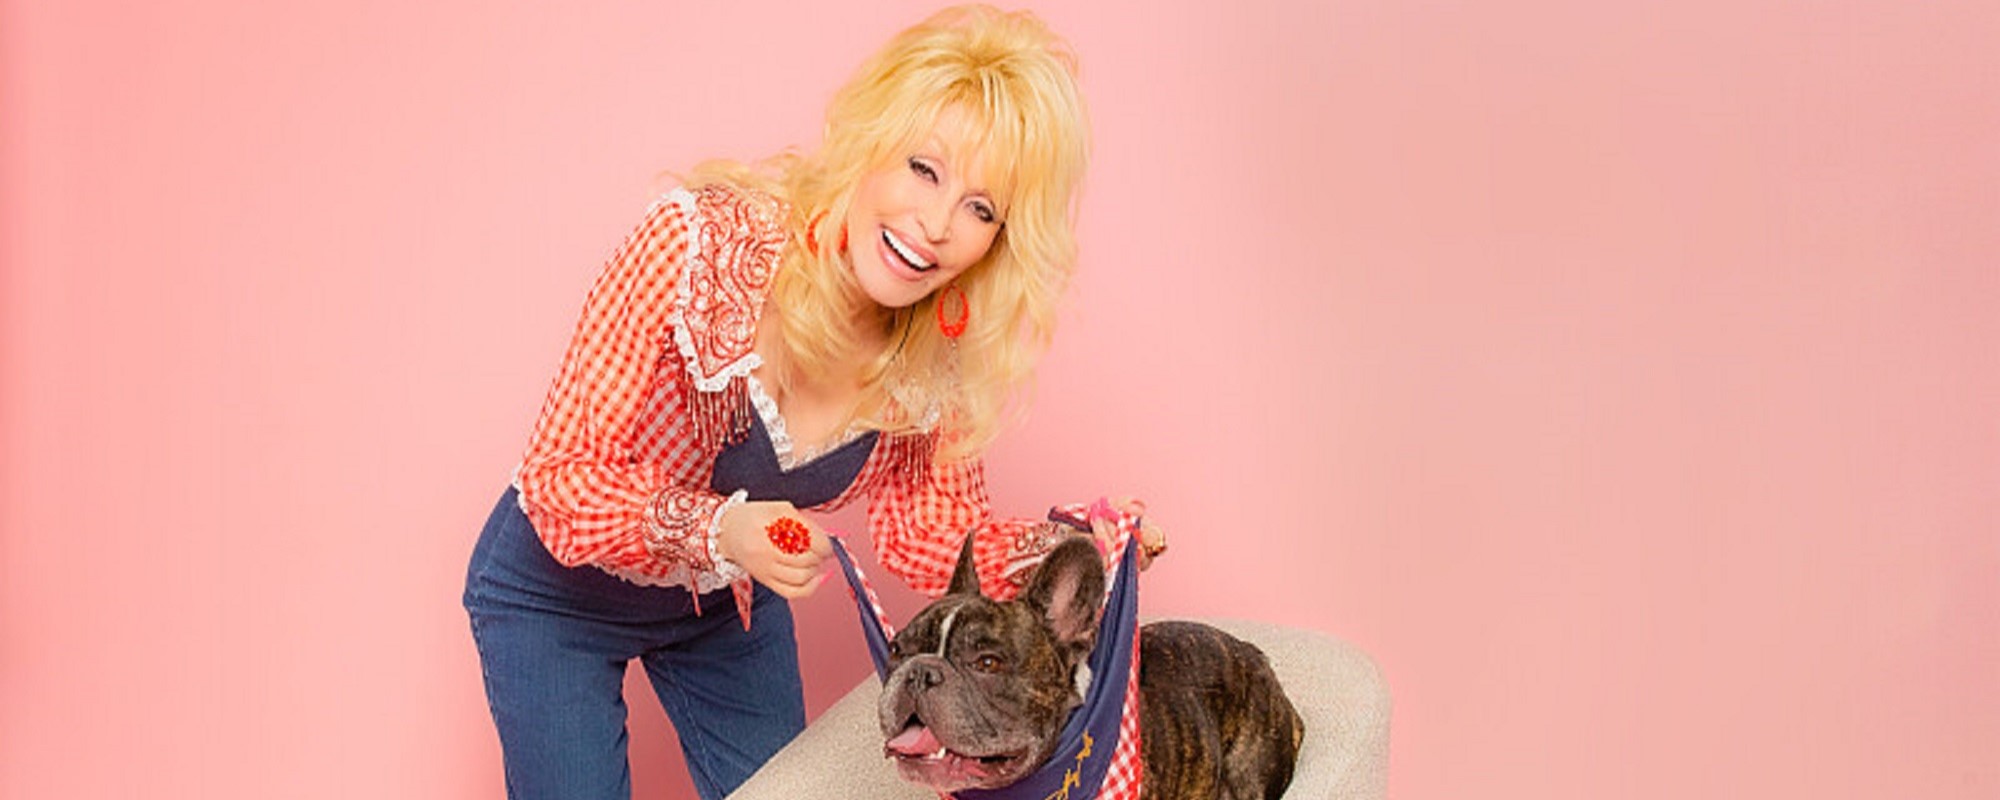 Behind the Song that Launched Dolly Parton to Stardom at 13 Years Old, “Puppy Love”